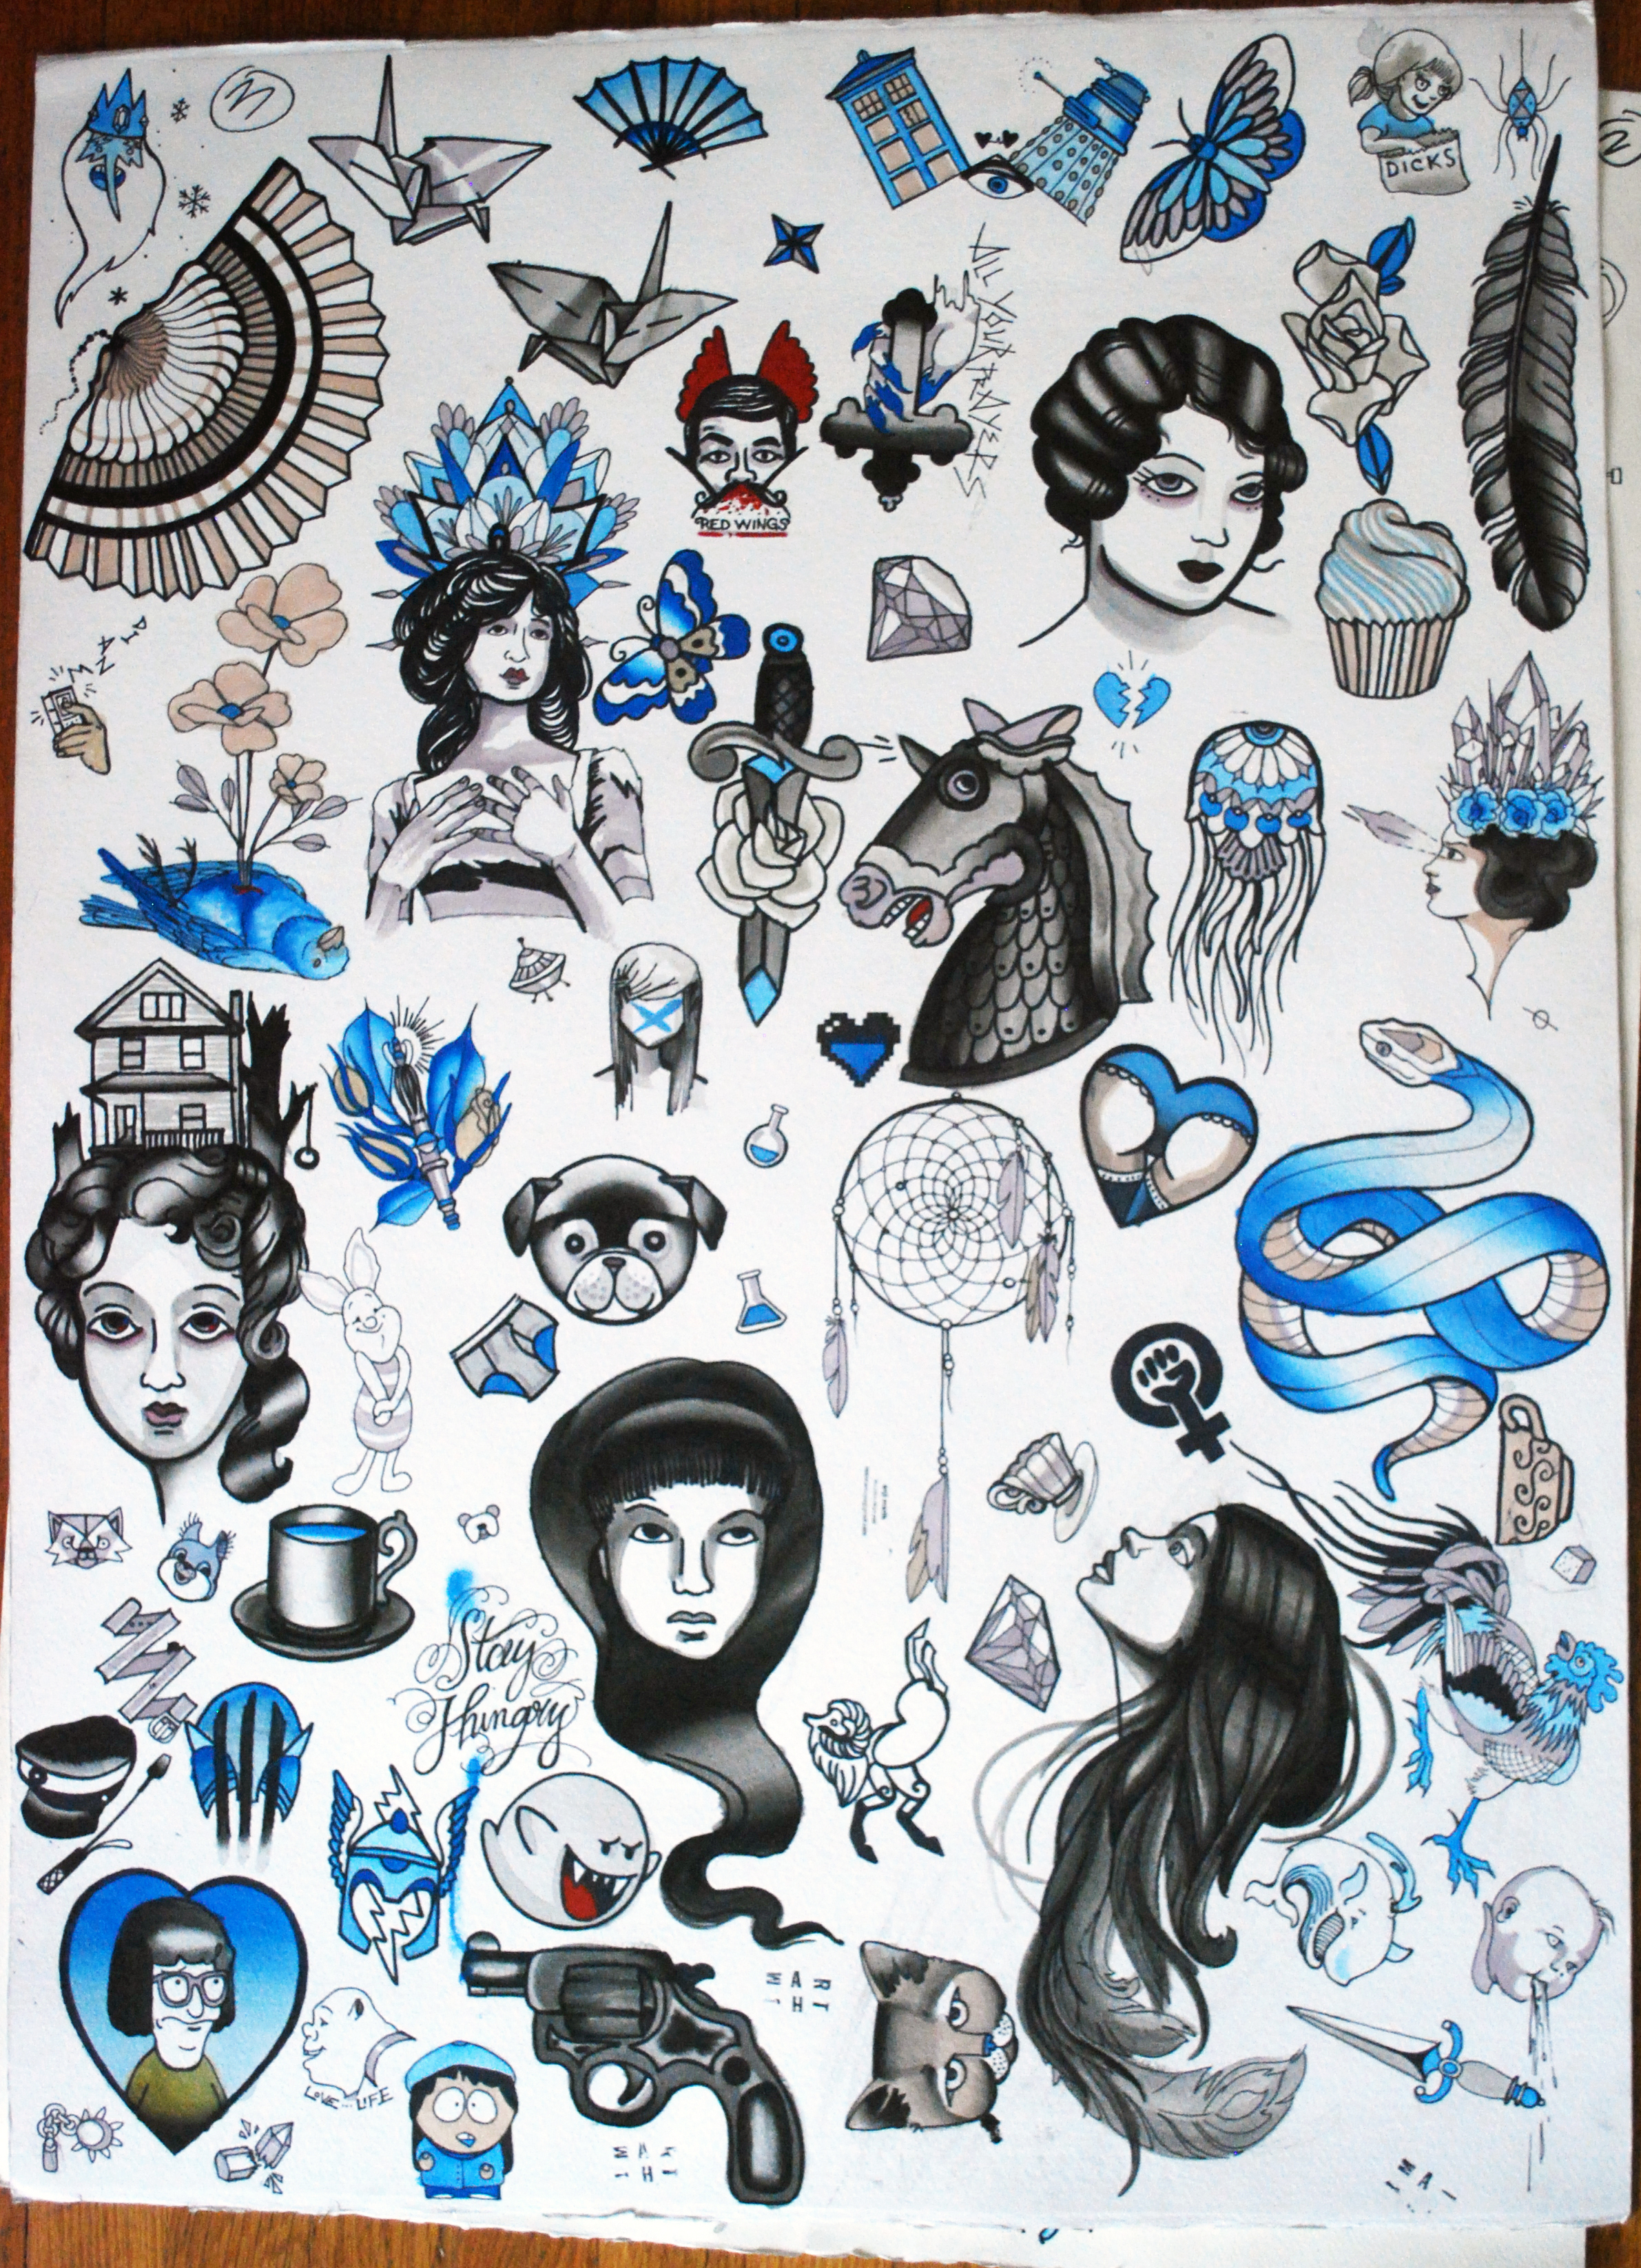 22x30" sheet of flash for tattoos, I did this to bring to the evergreen convention.